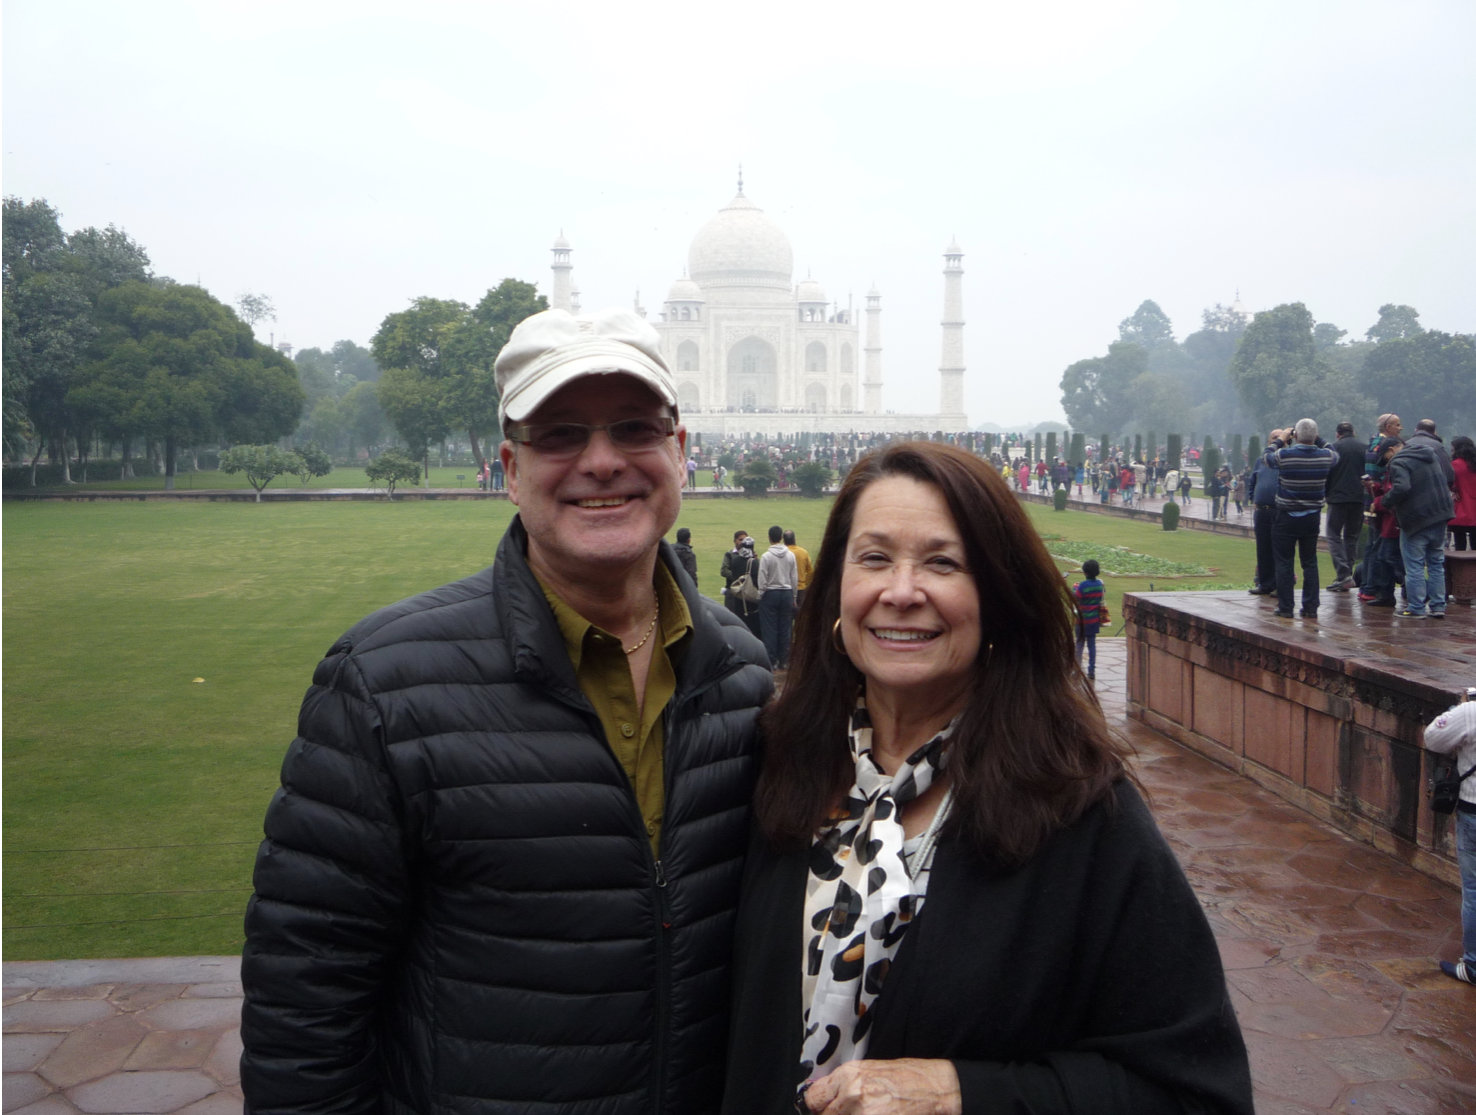 The owners of The Diamond Shop, Thom and Mona, standing in front of the Taj Mahal.